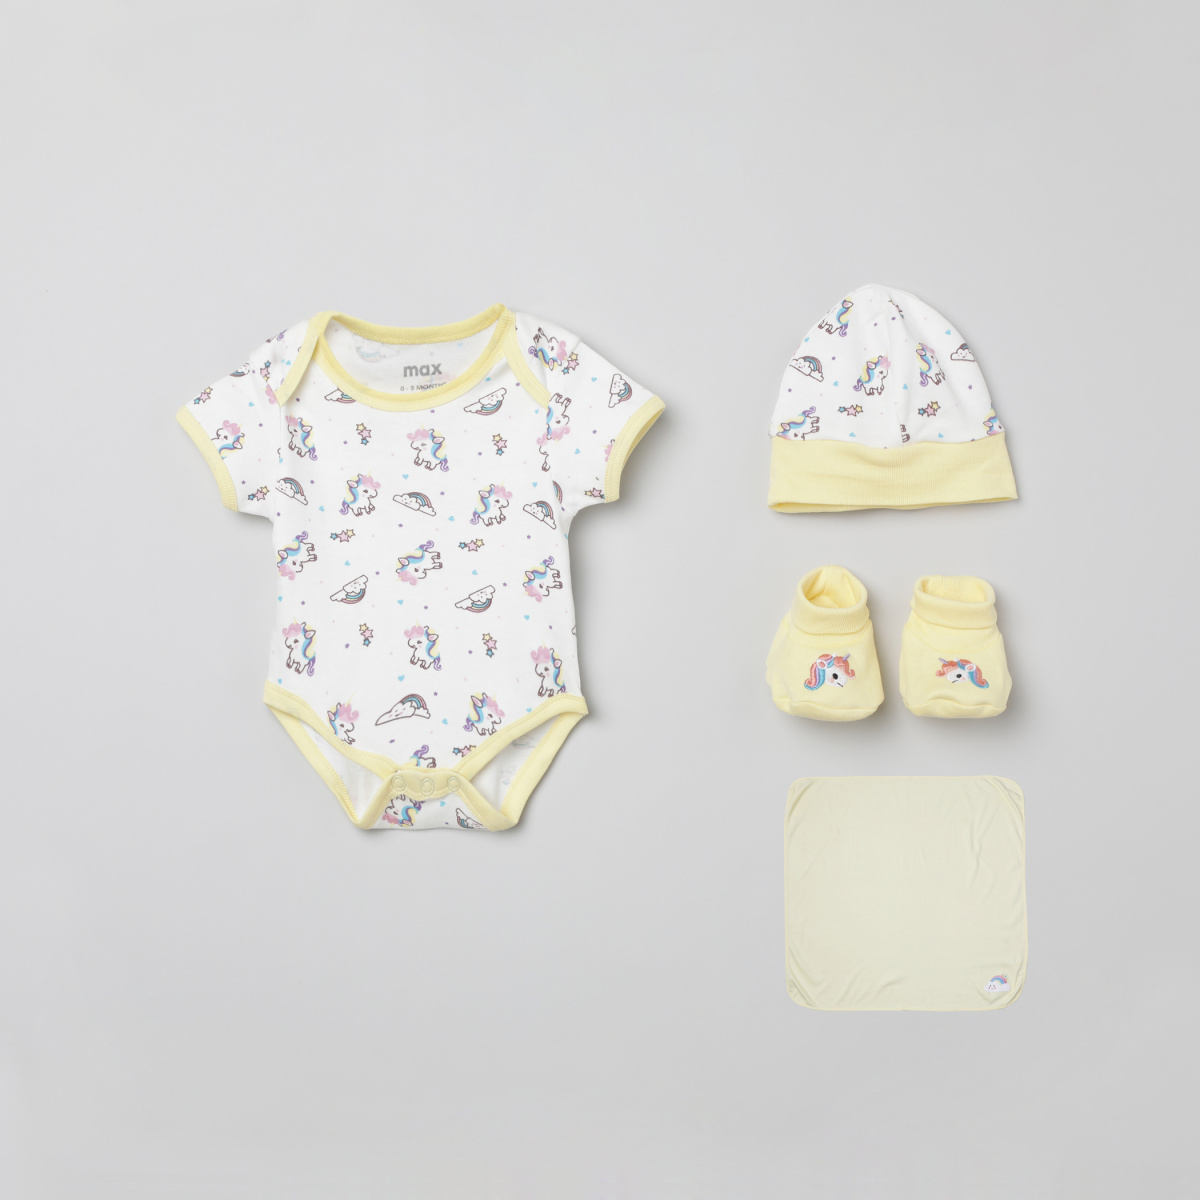 MAX Printed 5-Pc. Infant Gift Set